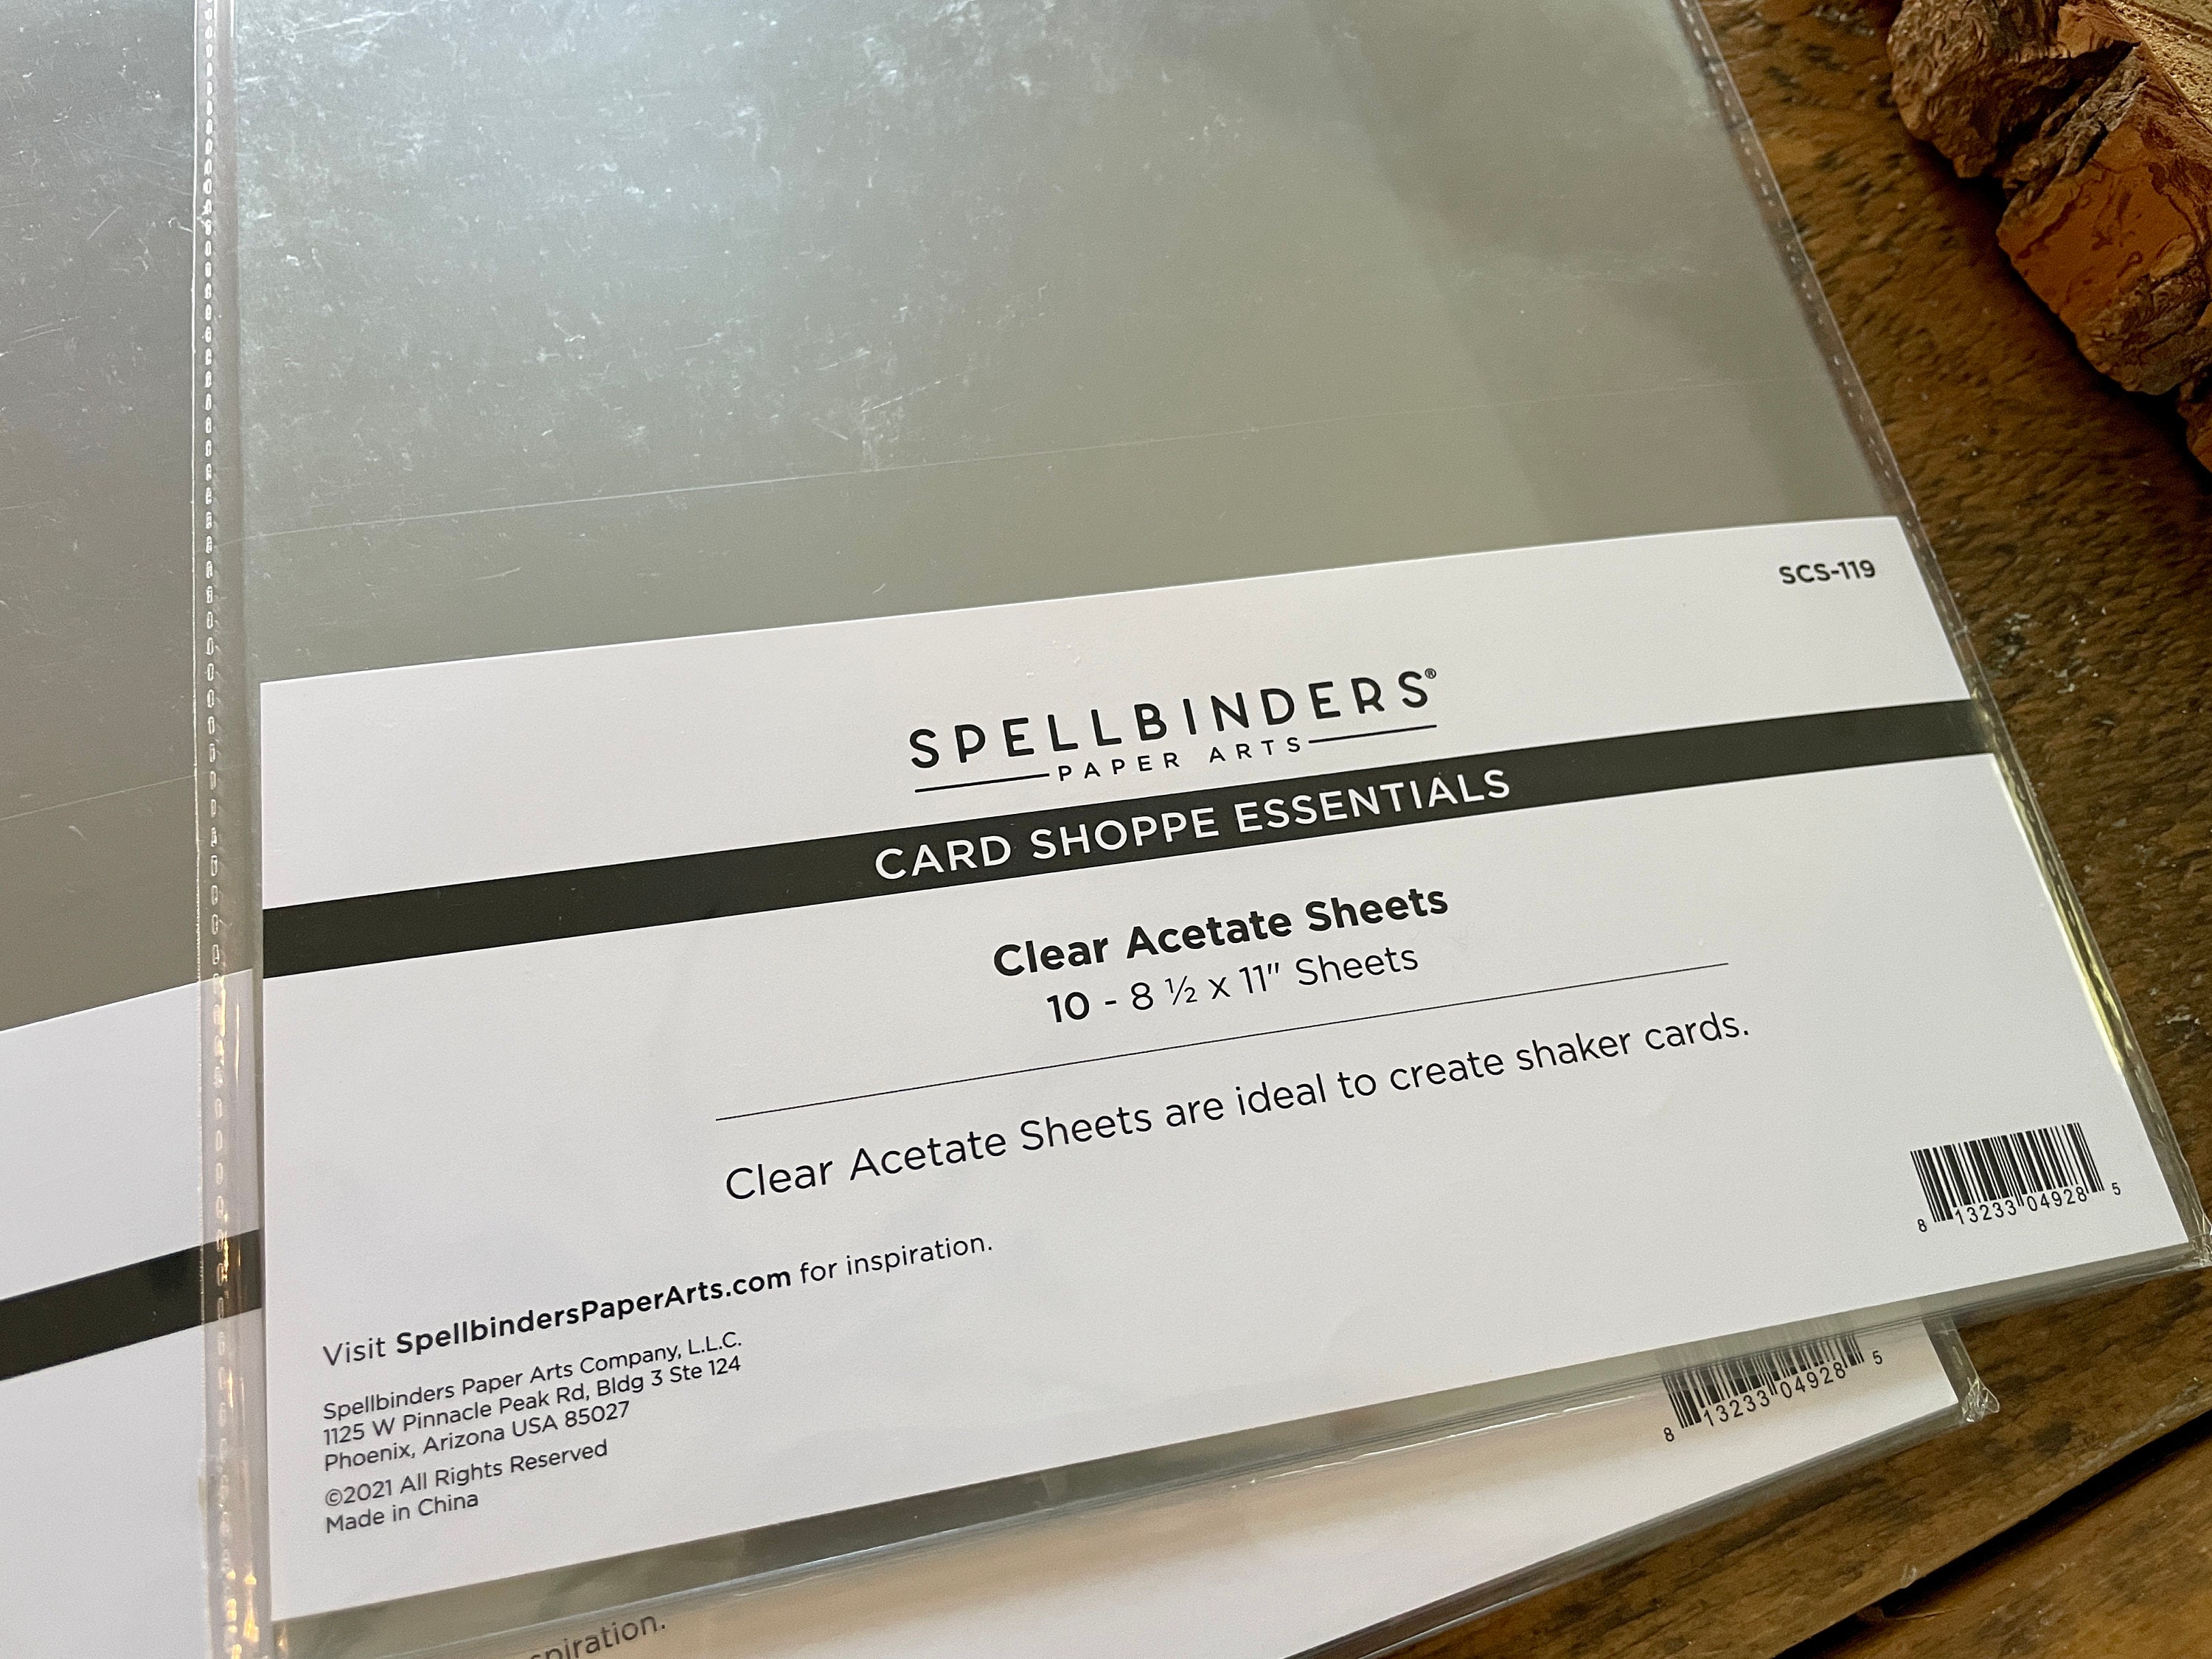 Spellbinders Card Shoppe Essentials Clear Acetate Sheets 8.5 X 11